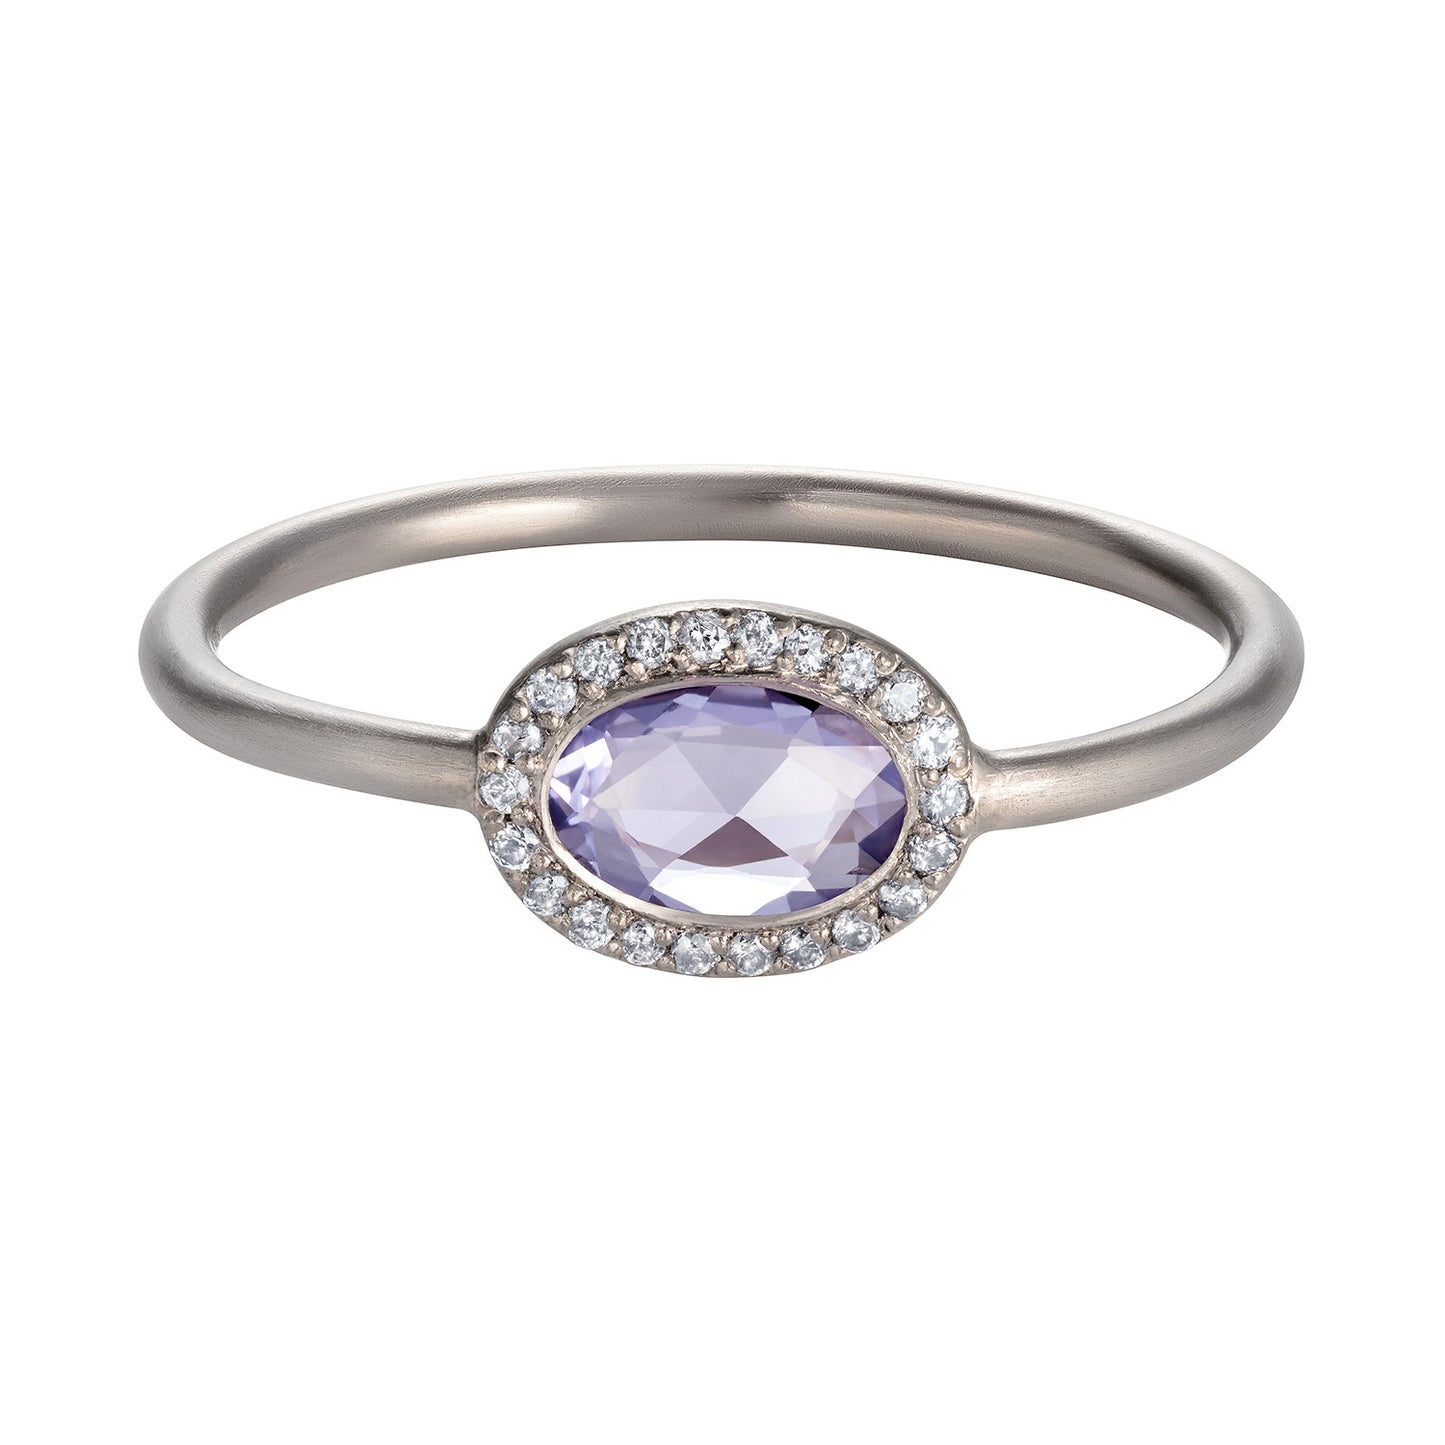 Sweet Pea 18ct white gold satin finish engagement ring set with oval lilac rose cut sapphire and white diamond halo surround.